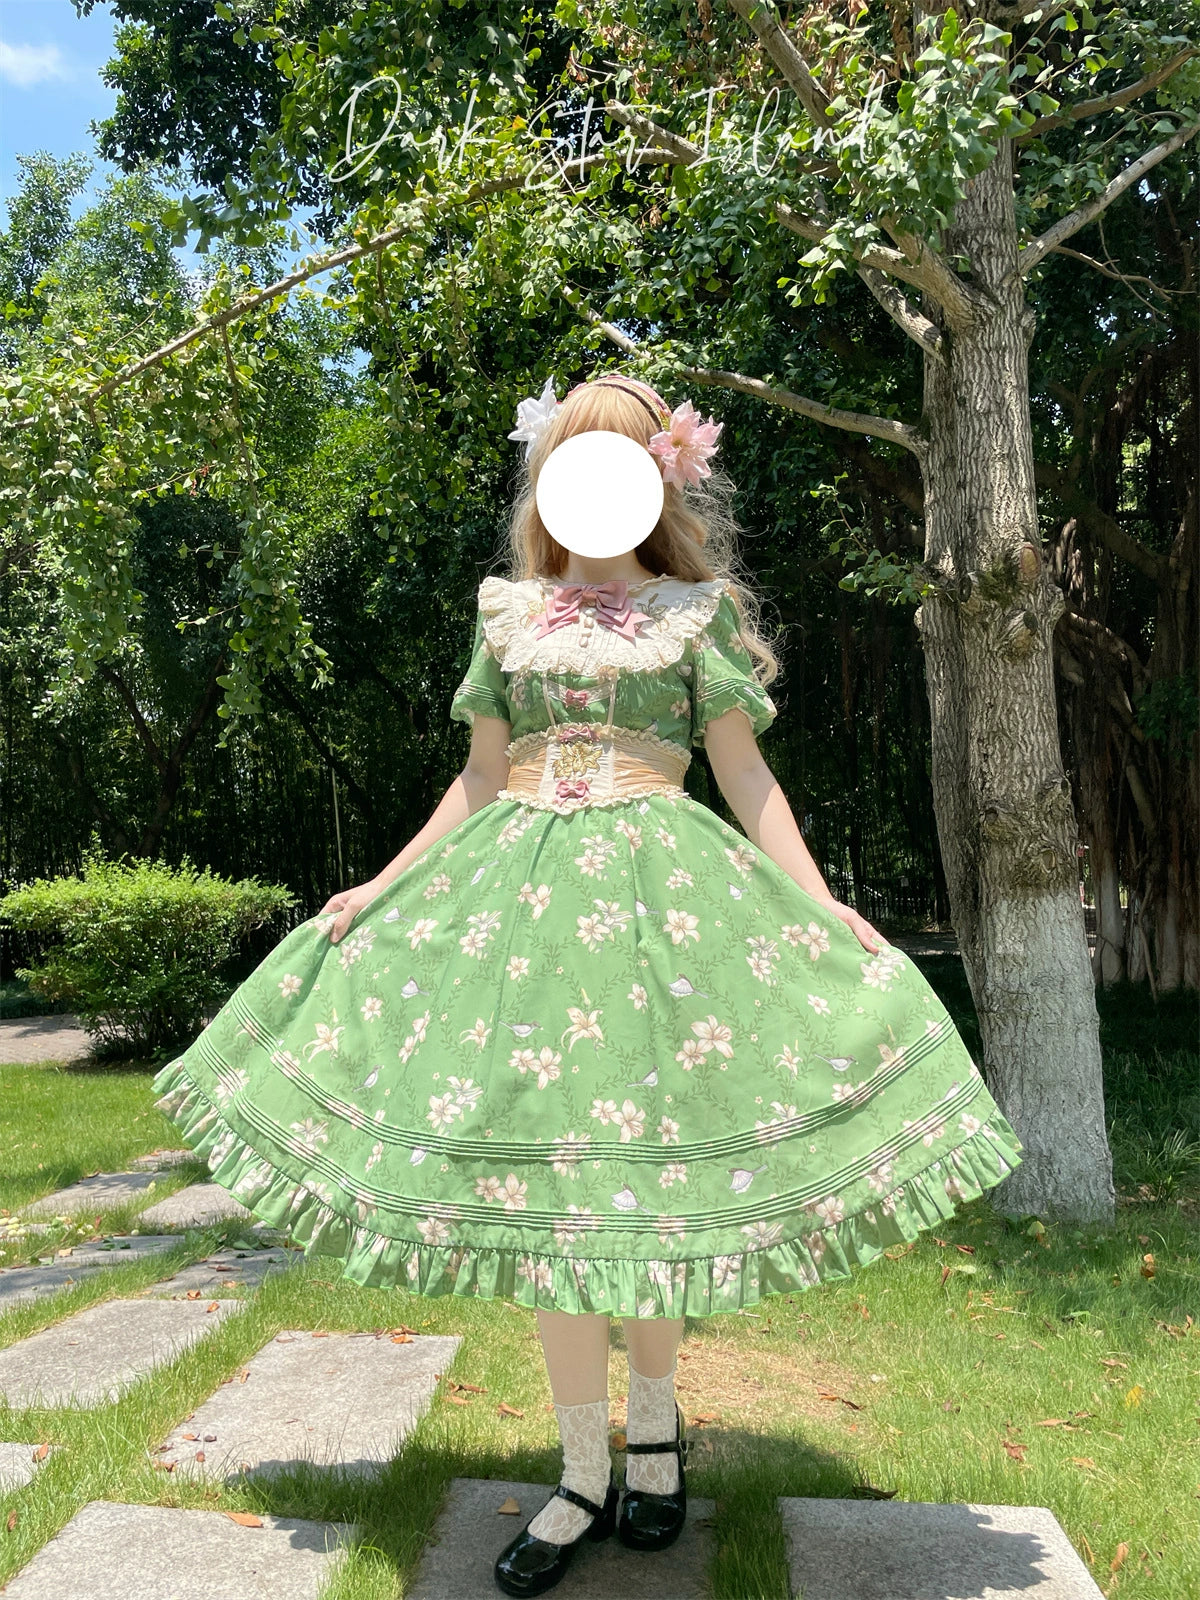 Dark Star Island~Lily&Mountain Breeze~Lily Printed Embroidery Lolita Long/Short OP   